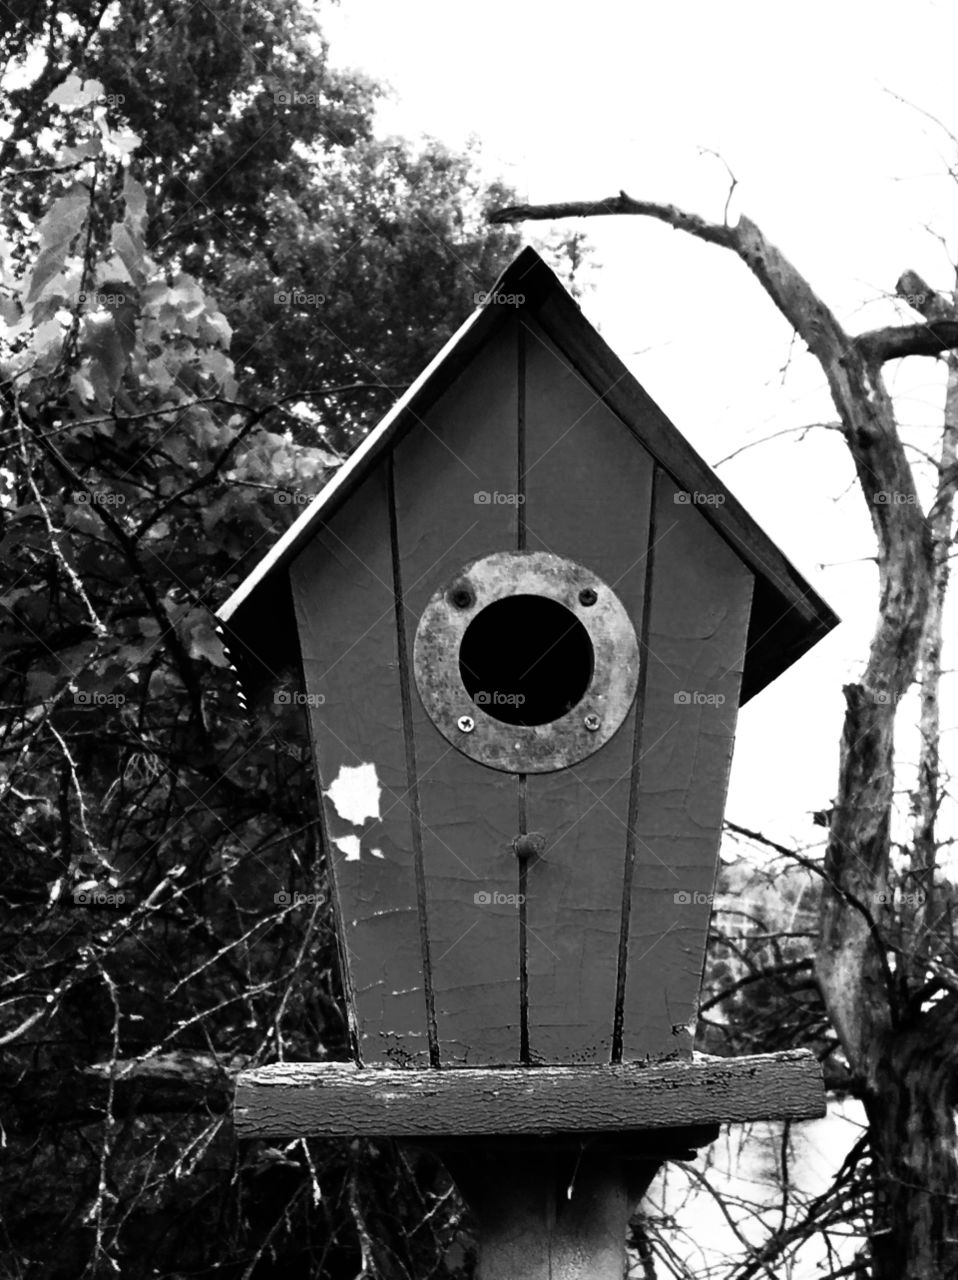 A close up of a bird house I found at an abandoned house in Northern Michigan 